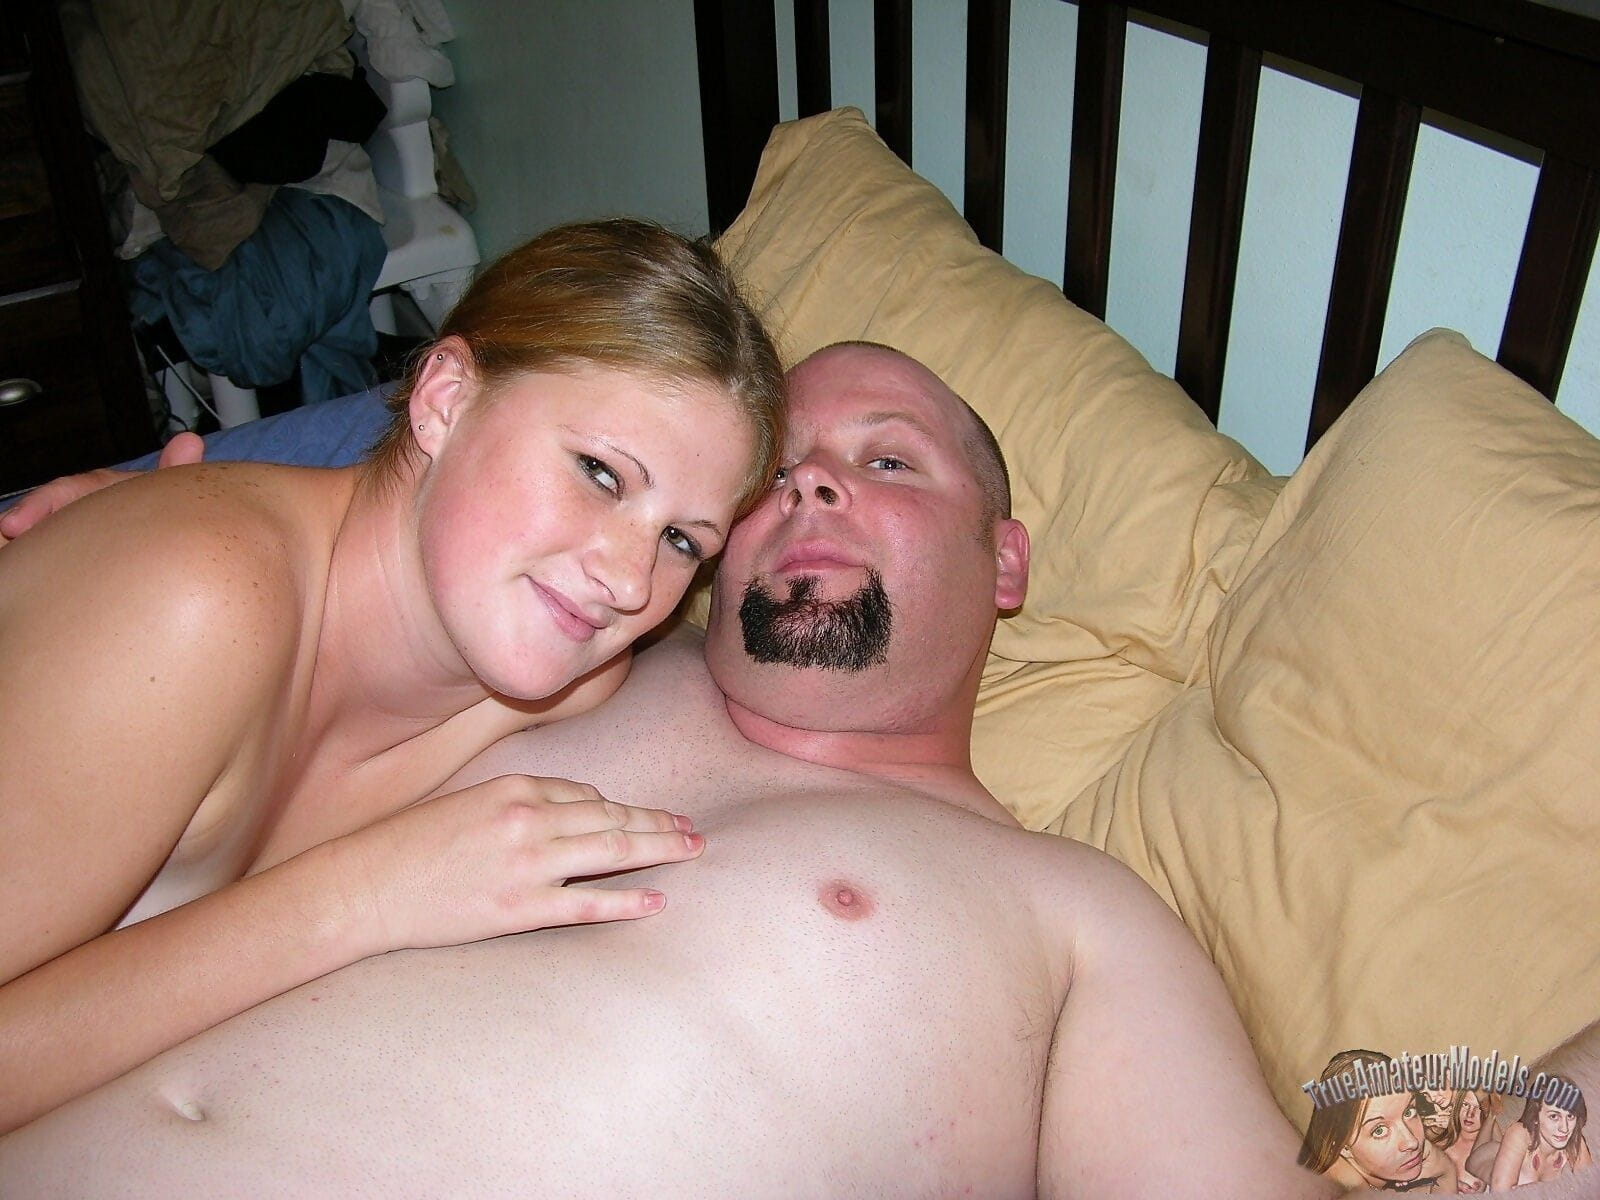 Big and bald dude busts his load in blonde teens mouth - part 2425 page 1